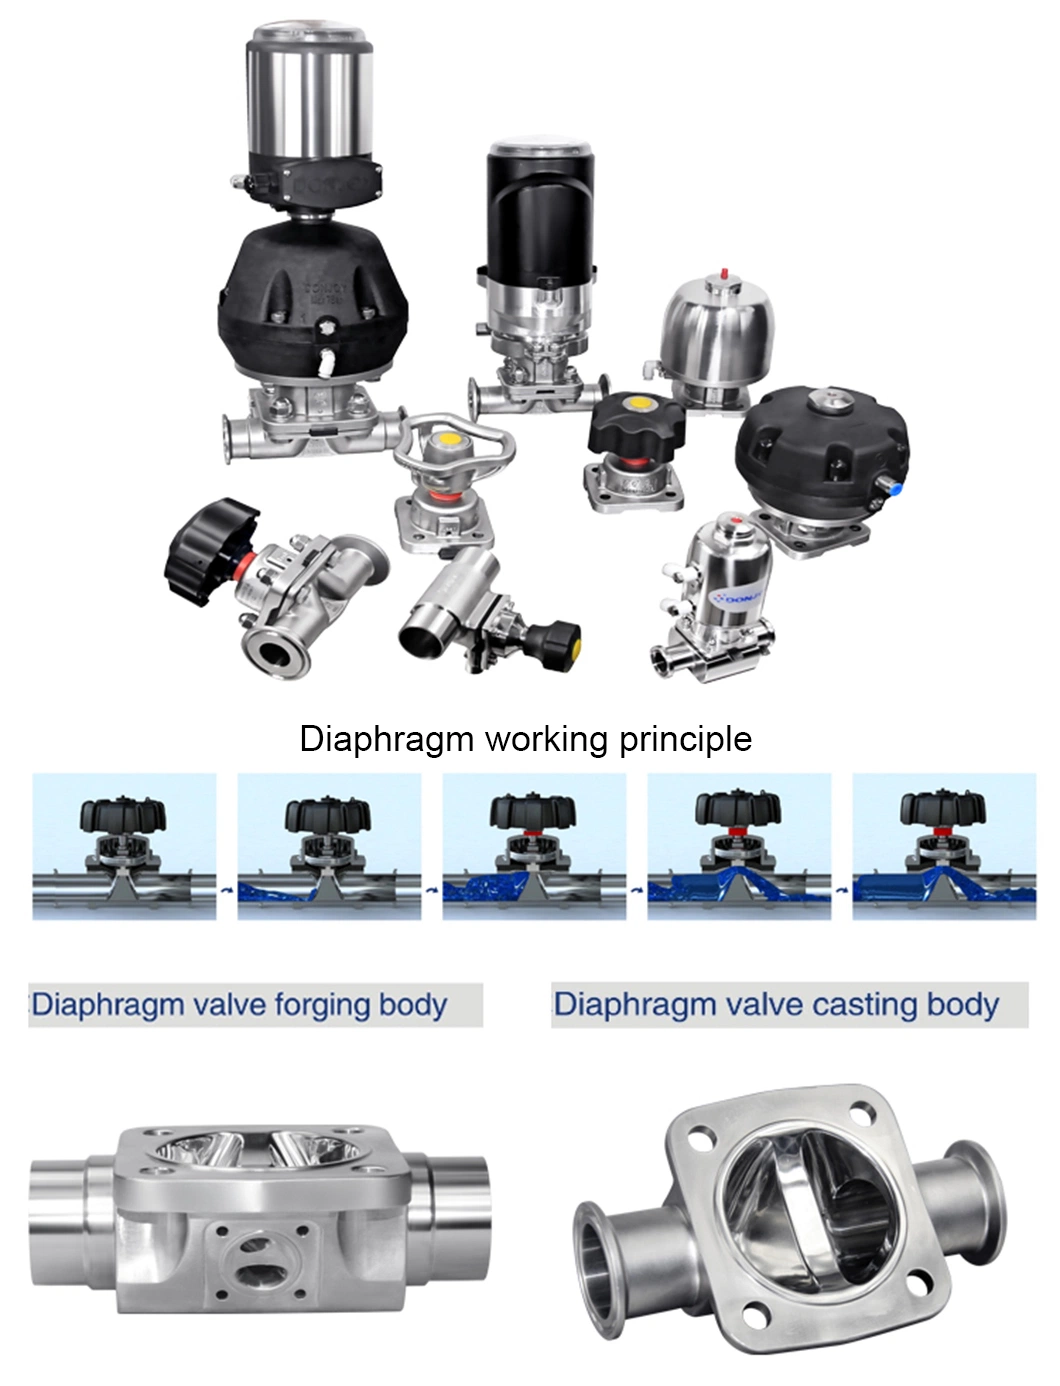 Stainless Steel Pneumatic Clamped Hygienic Process Control Diaphragm Valve